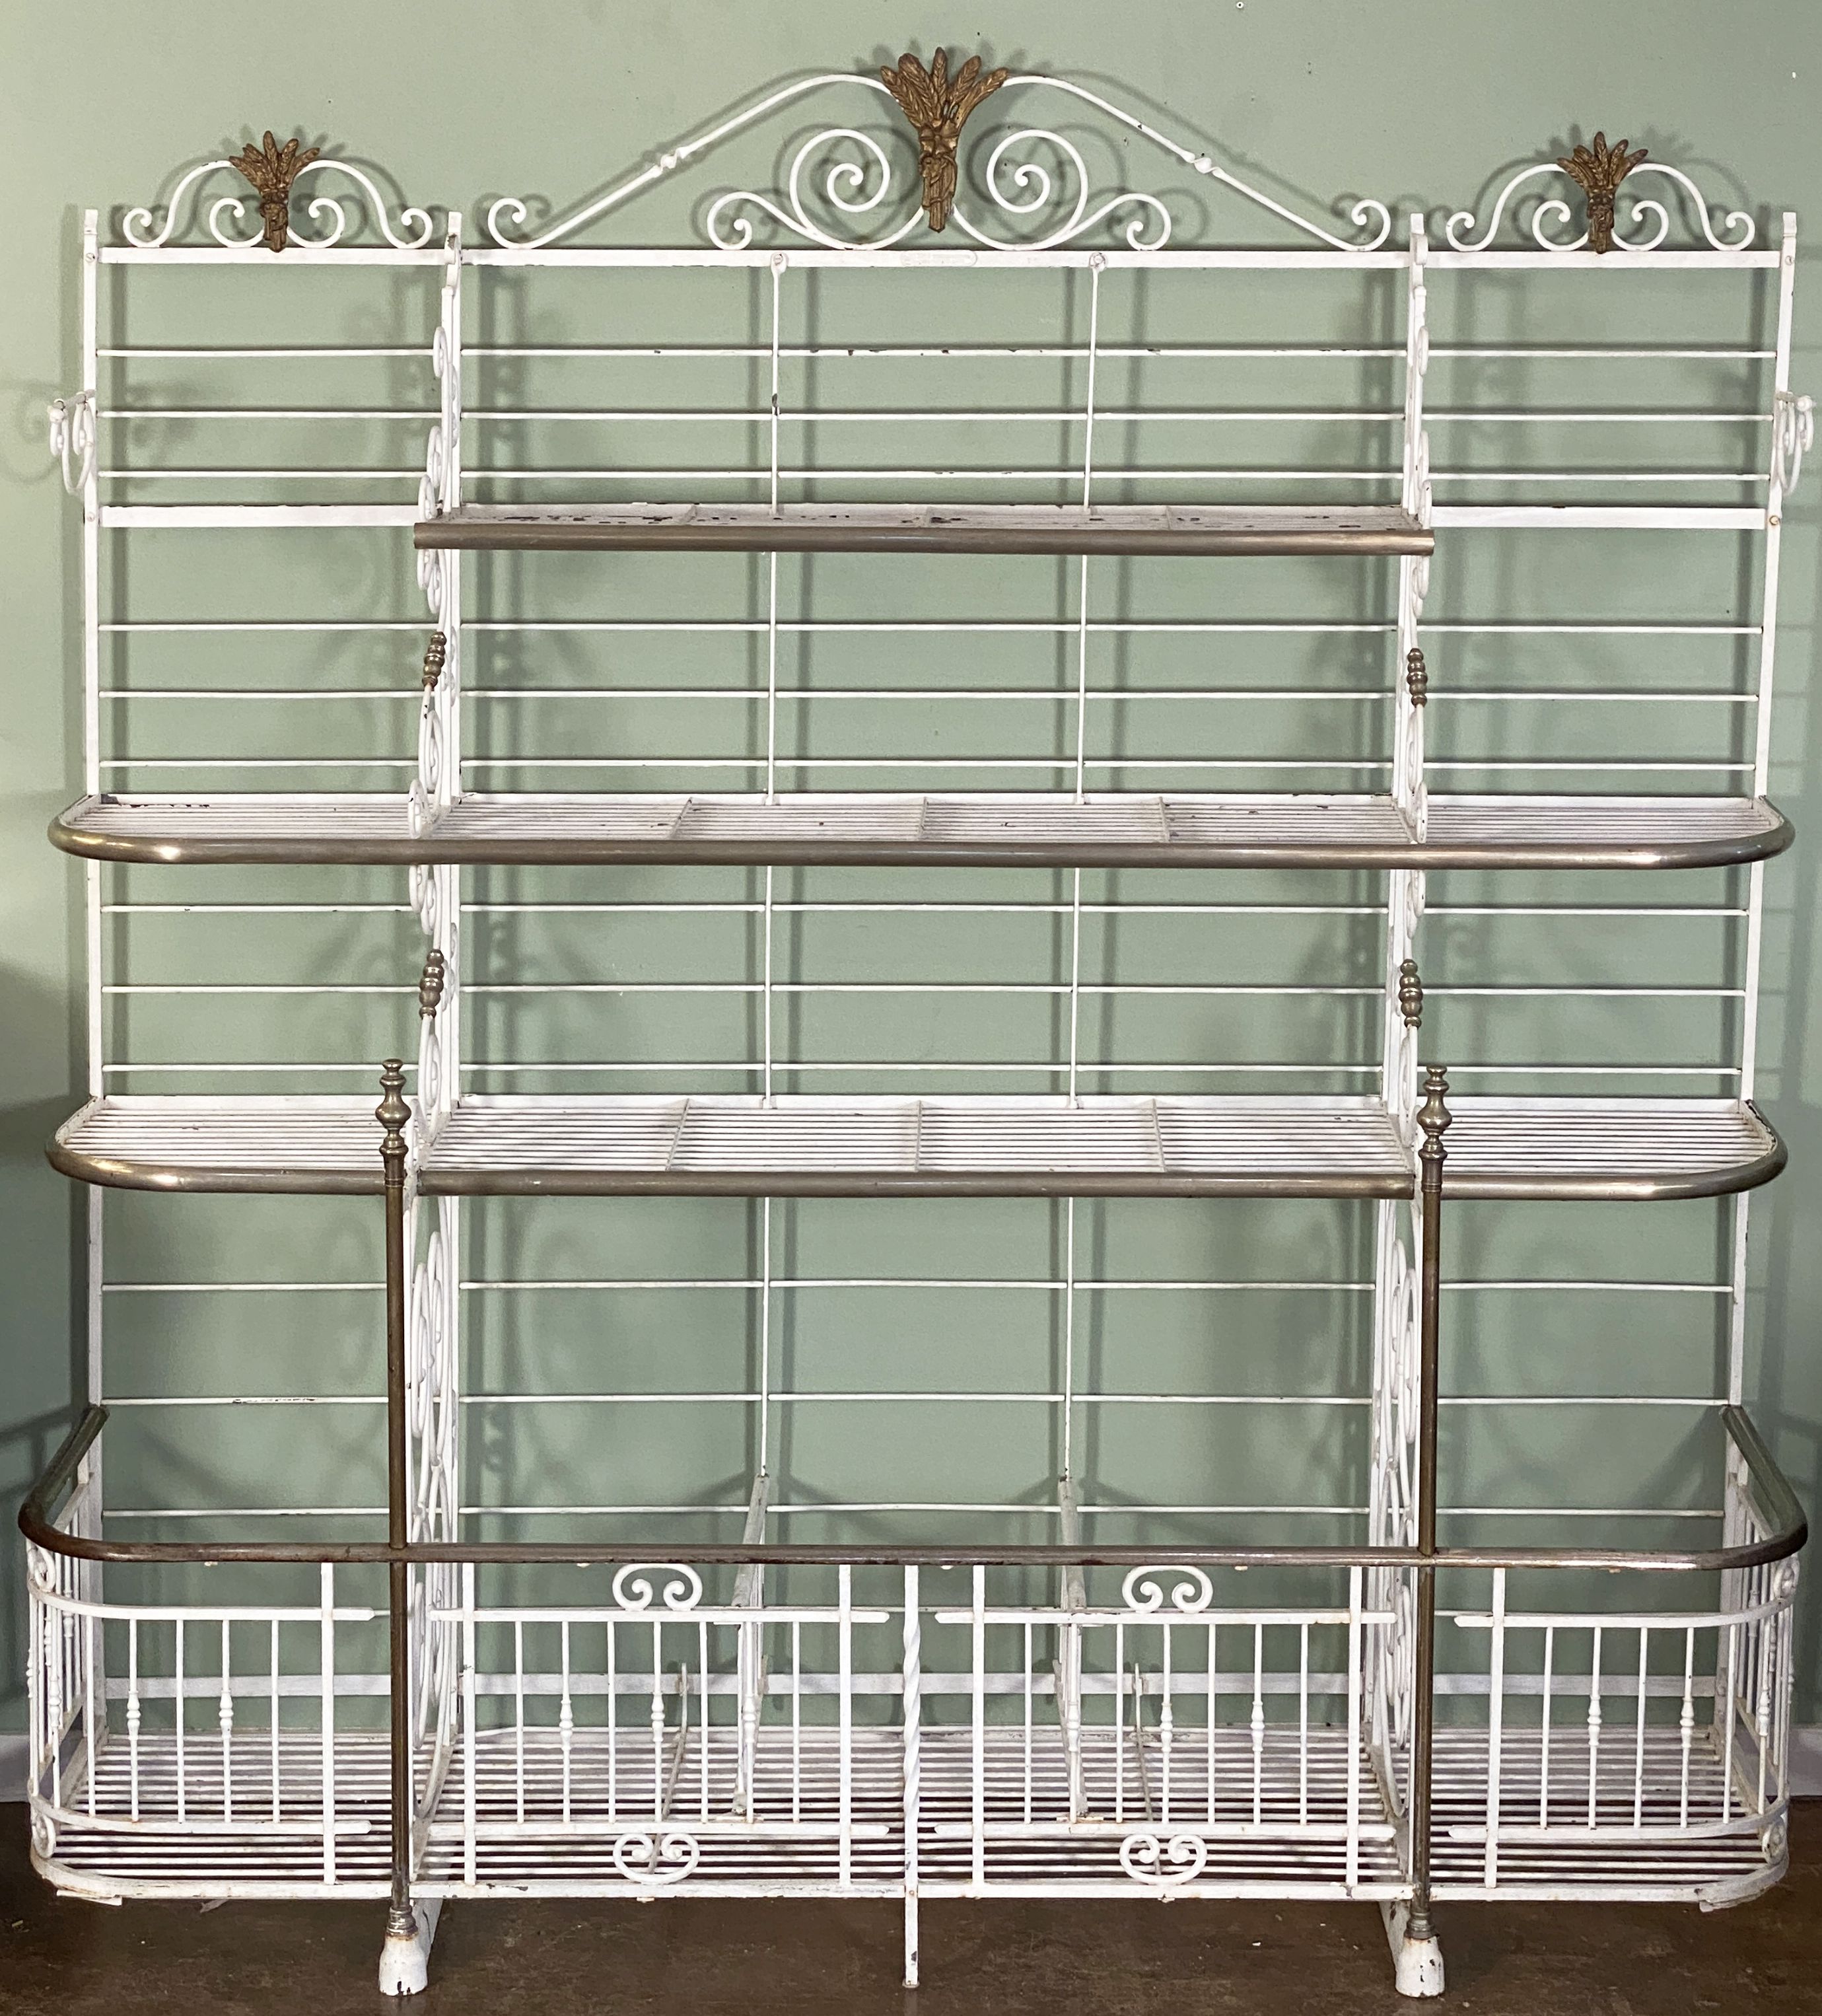 A large French baker's rack boulangerie or patisserie display stand of painted wrought iron with decorative brass and nickel trim - featuring a beautiful frame with scrolled dividing panels, topped with finials and detailed gilded sheaves of wheat,